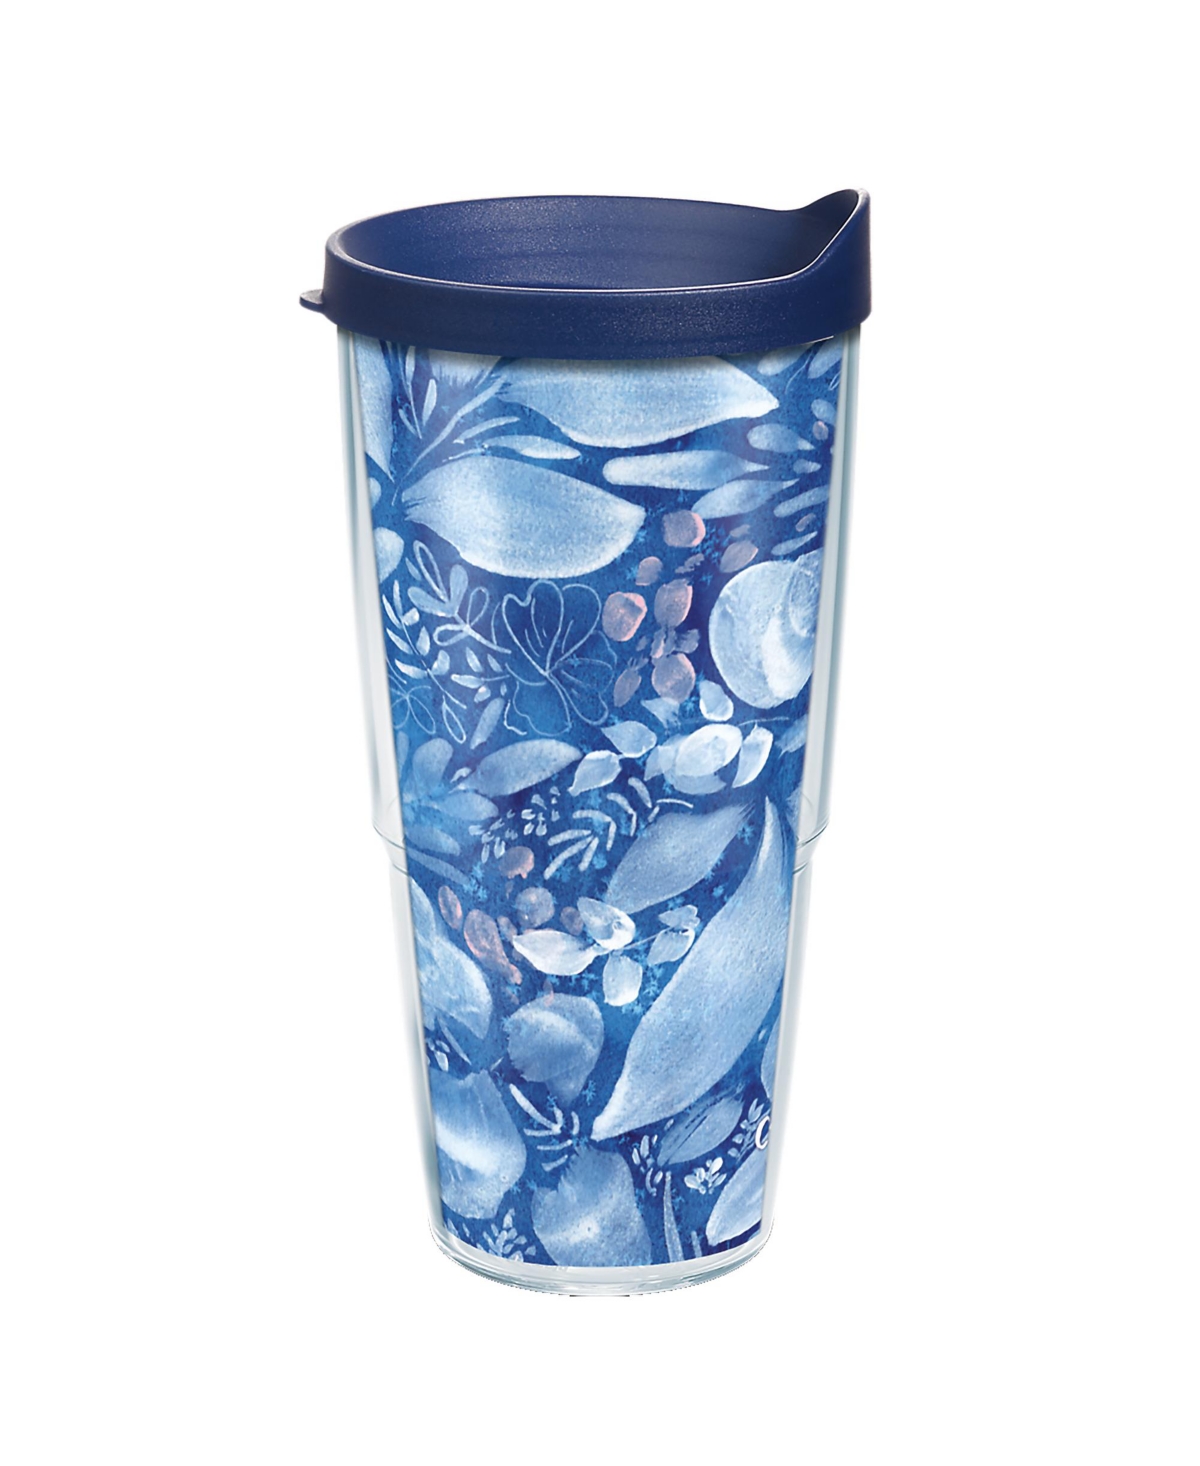 Tervis Tumbler Tervis Creative Ingrid - Navy Full Flower Made In Usa Double Walled Insulated Tumbler Travel Cup Kee In Open Miscellaneous